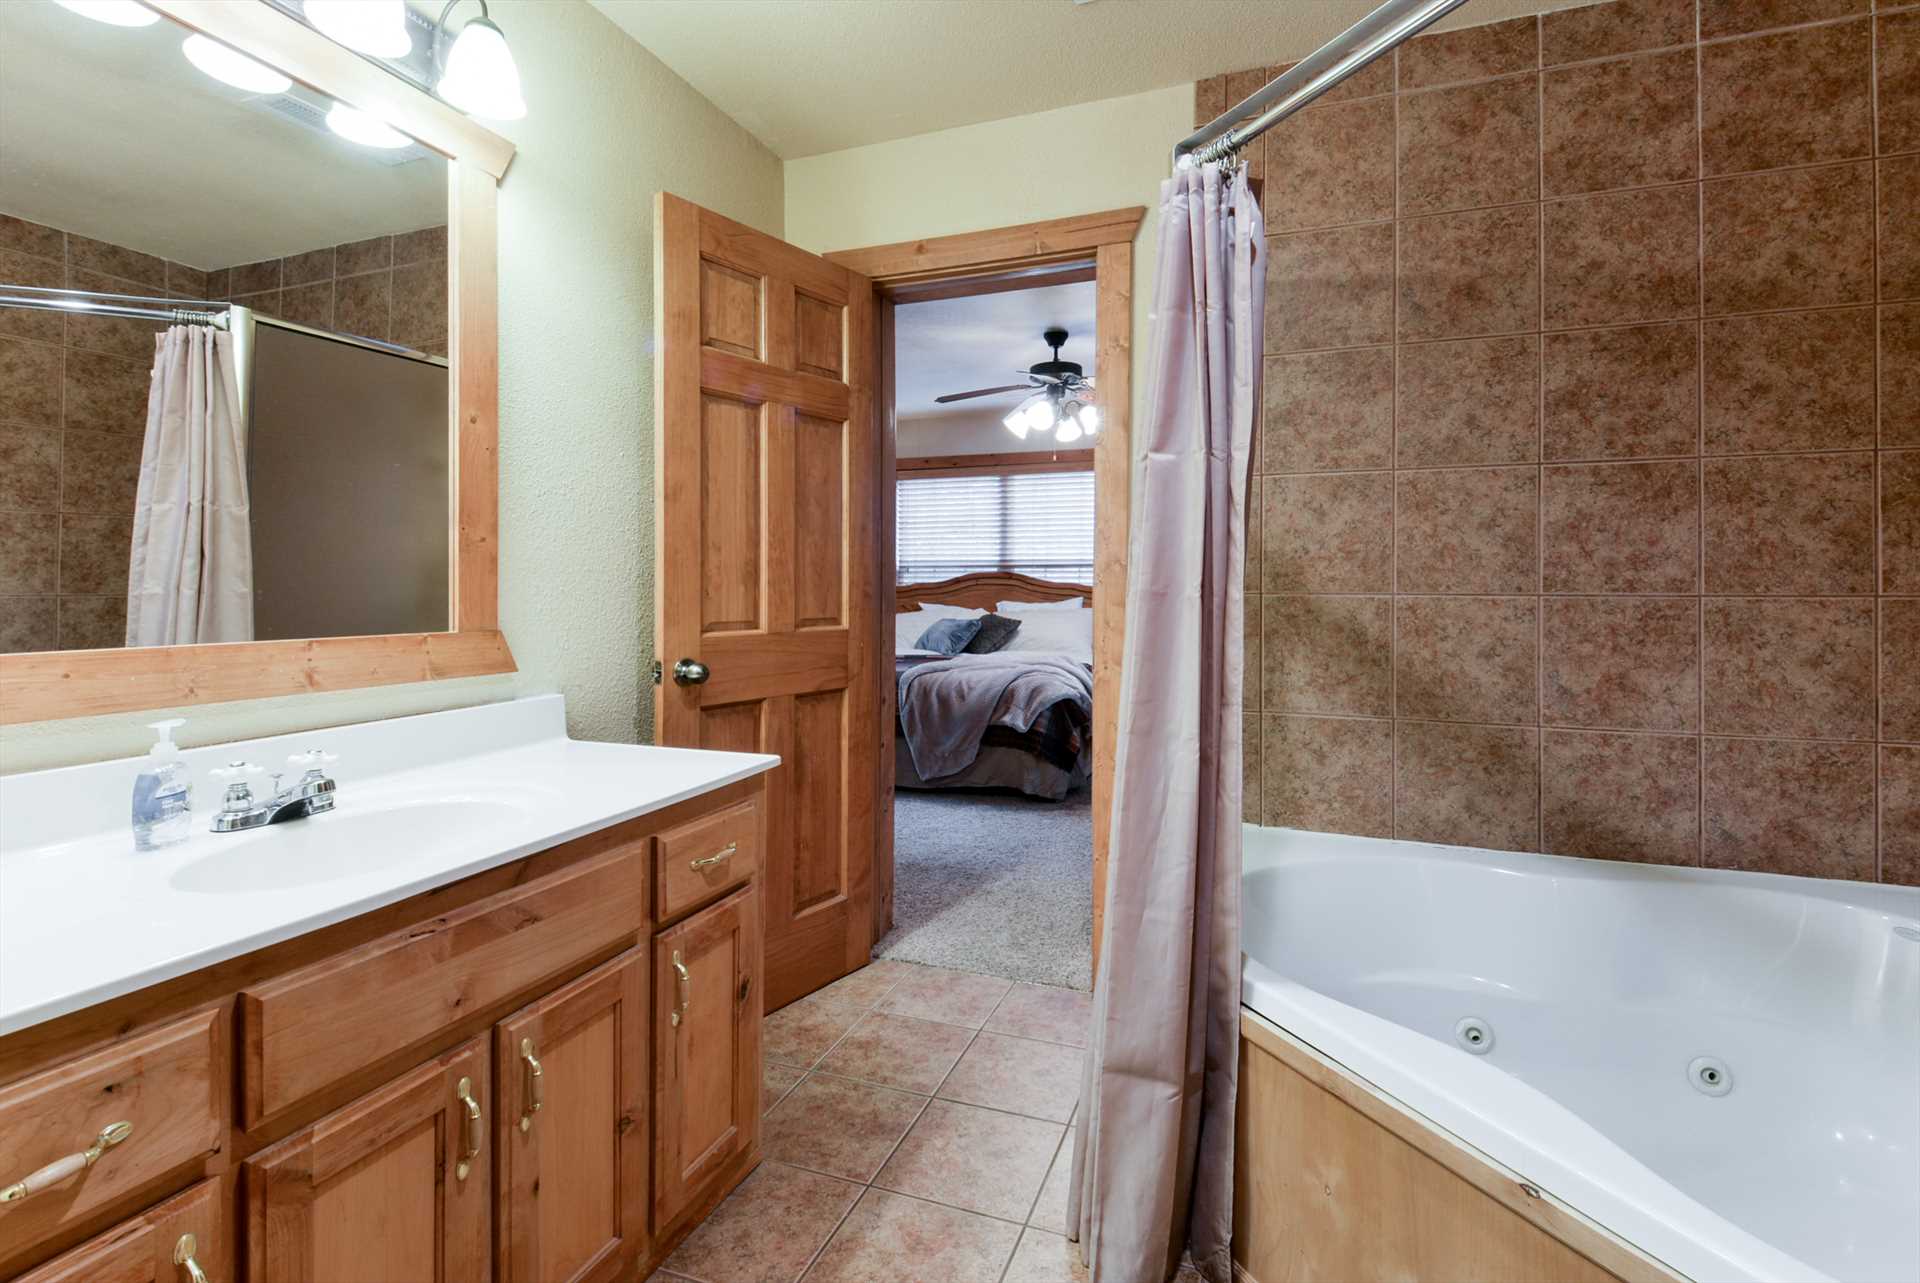 Each have an attached bathroom as well, Lodge #24.